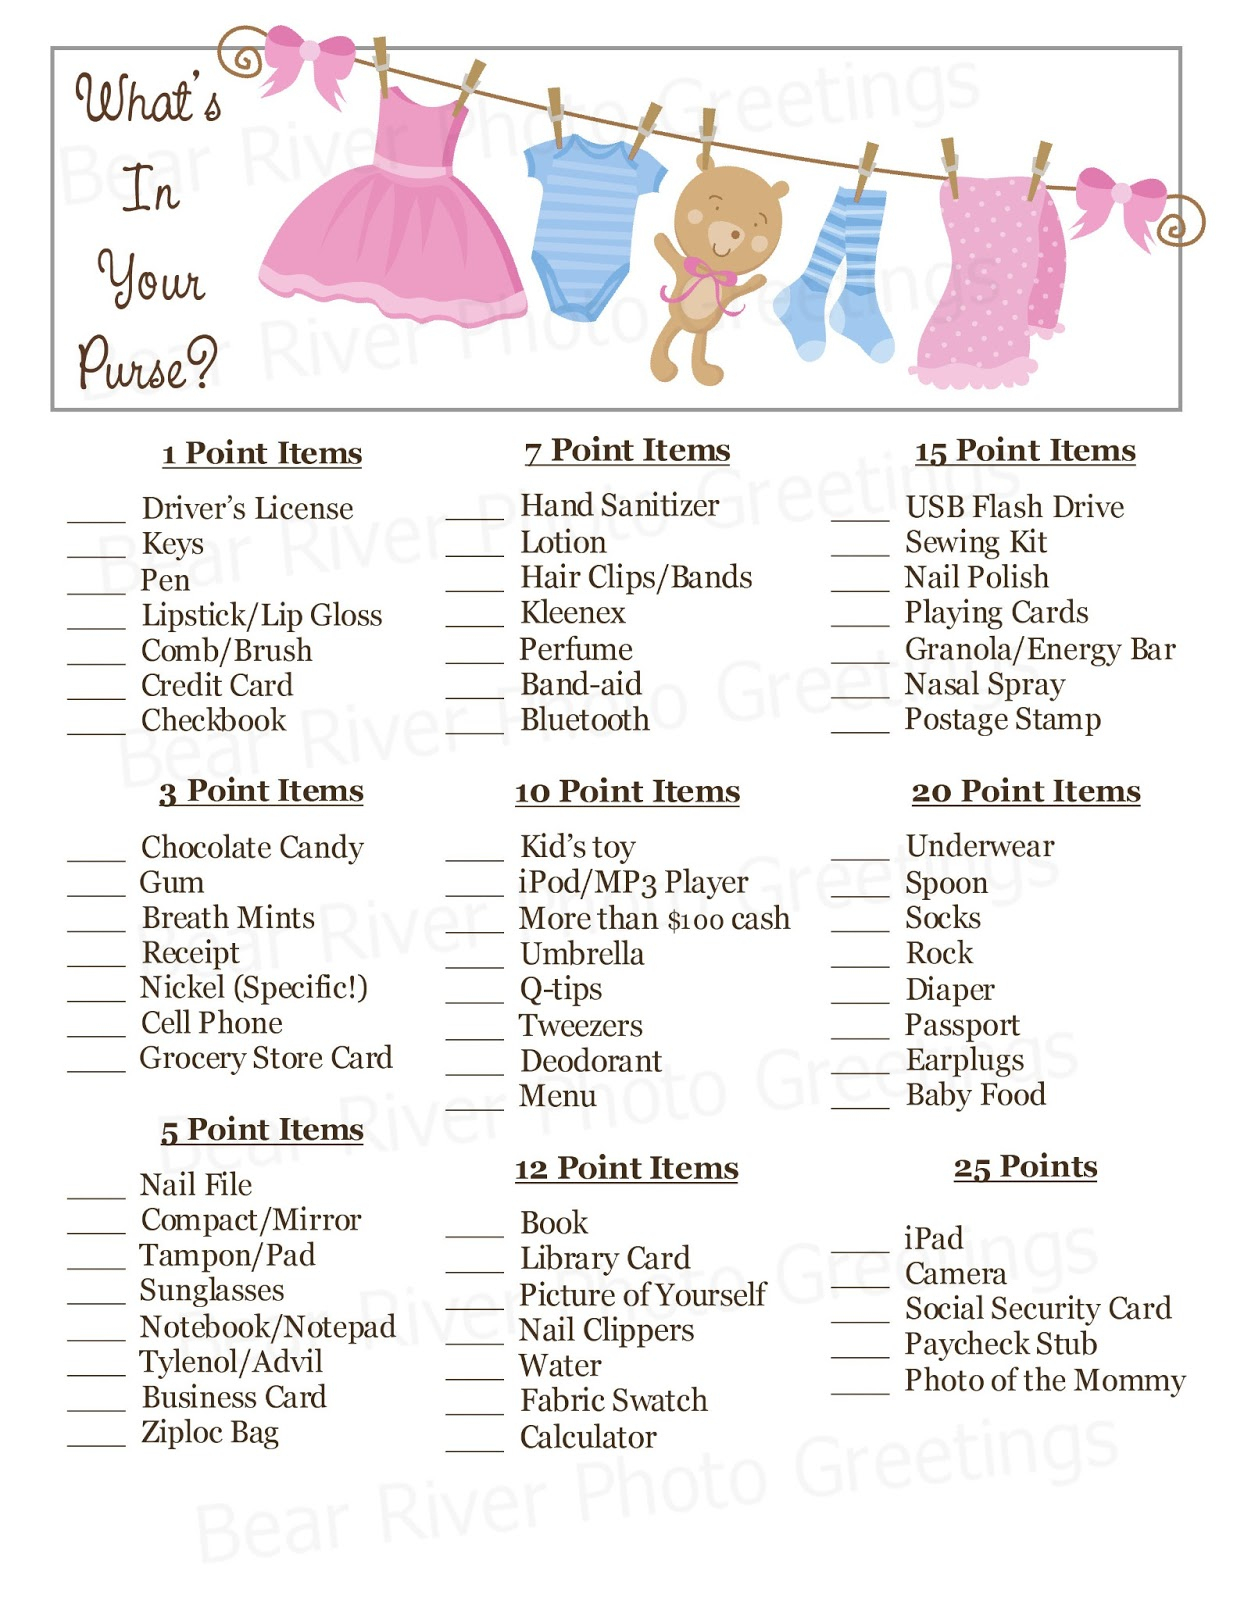 Bear River Photo Greetings: 2013 - Free Printable What&amp;#039;s In Your Purse Game